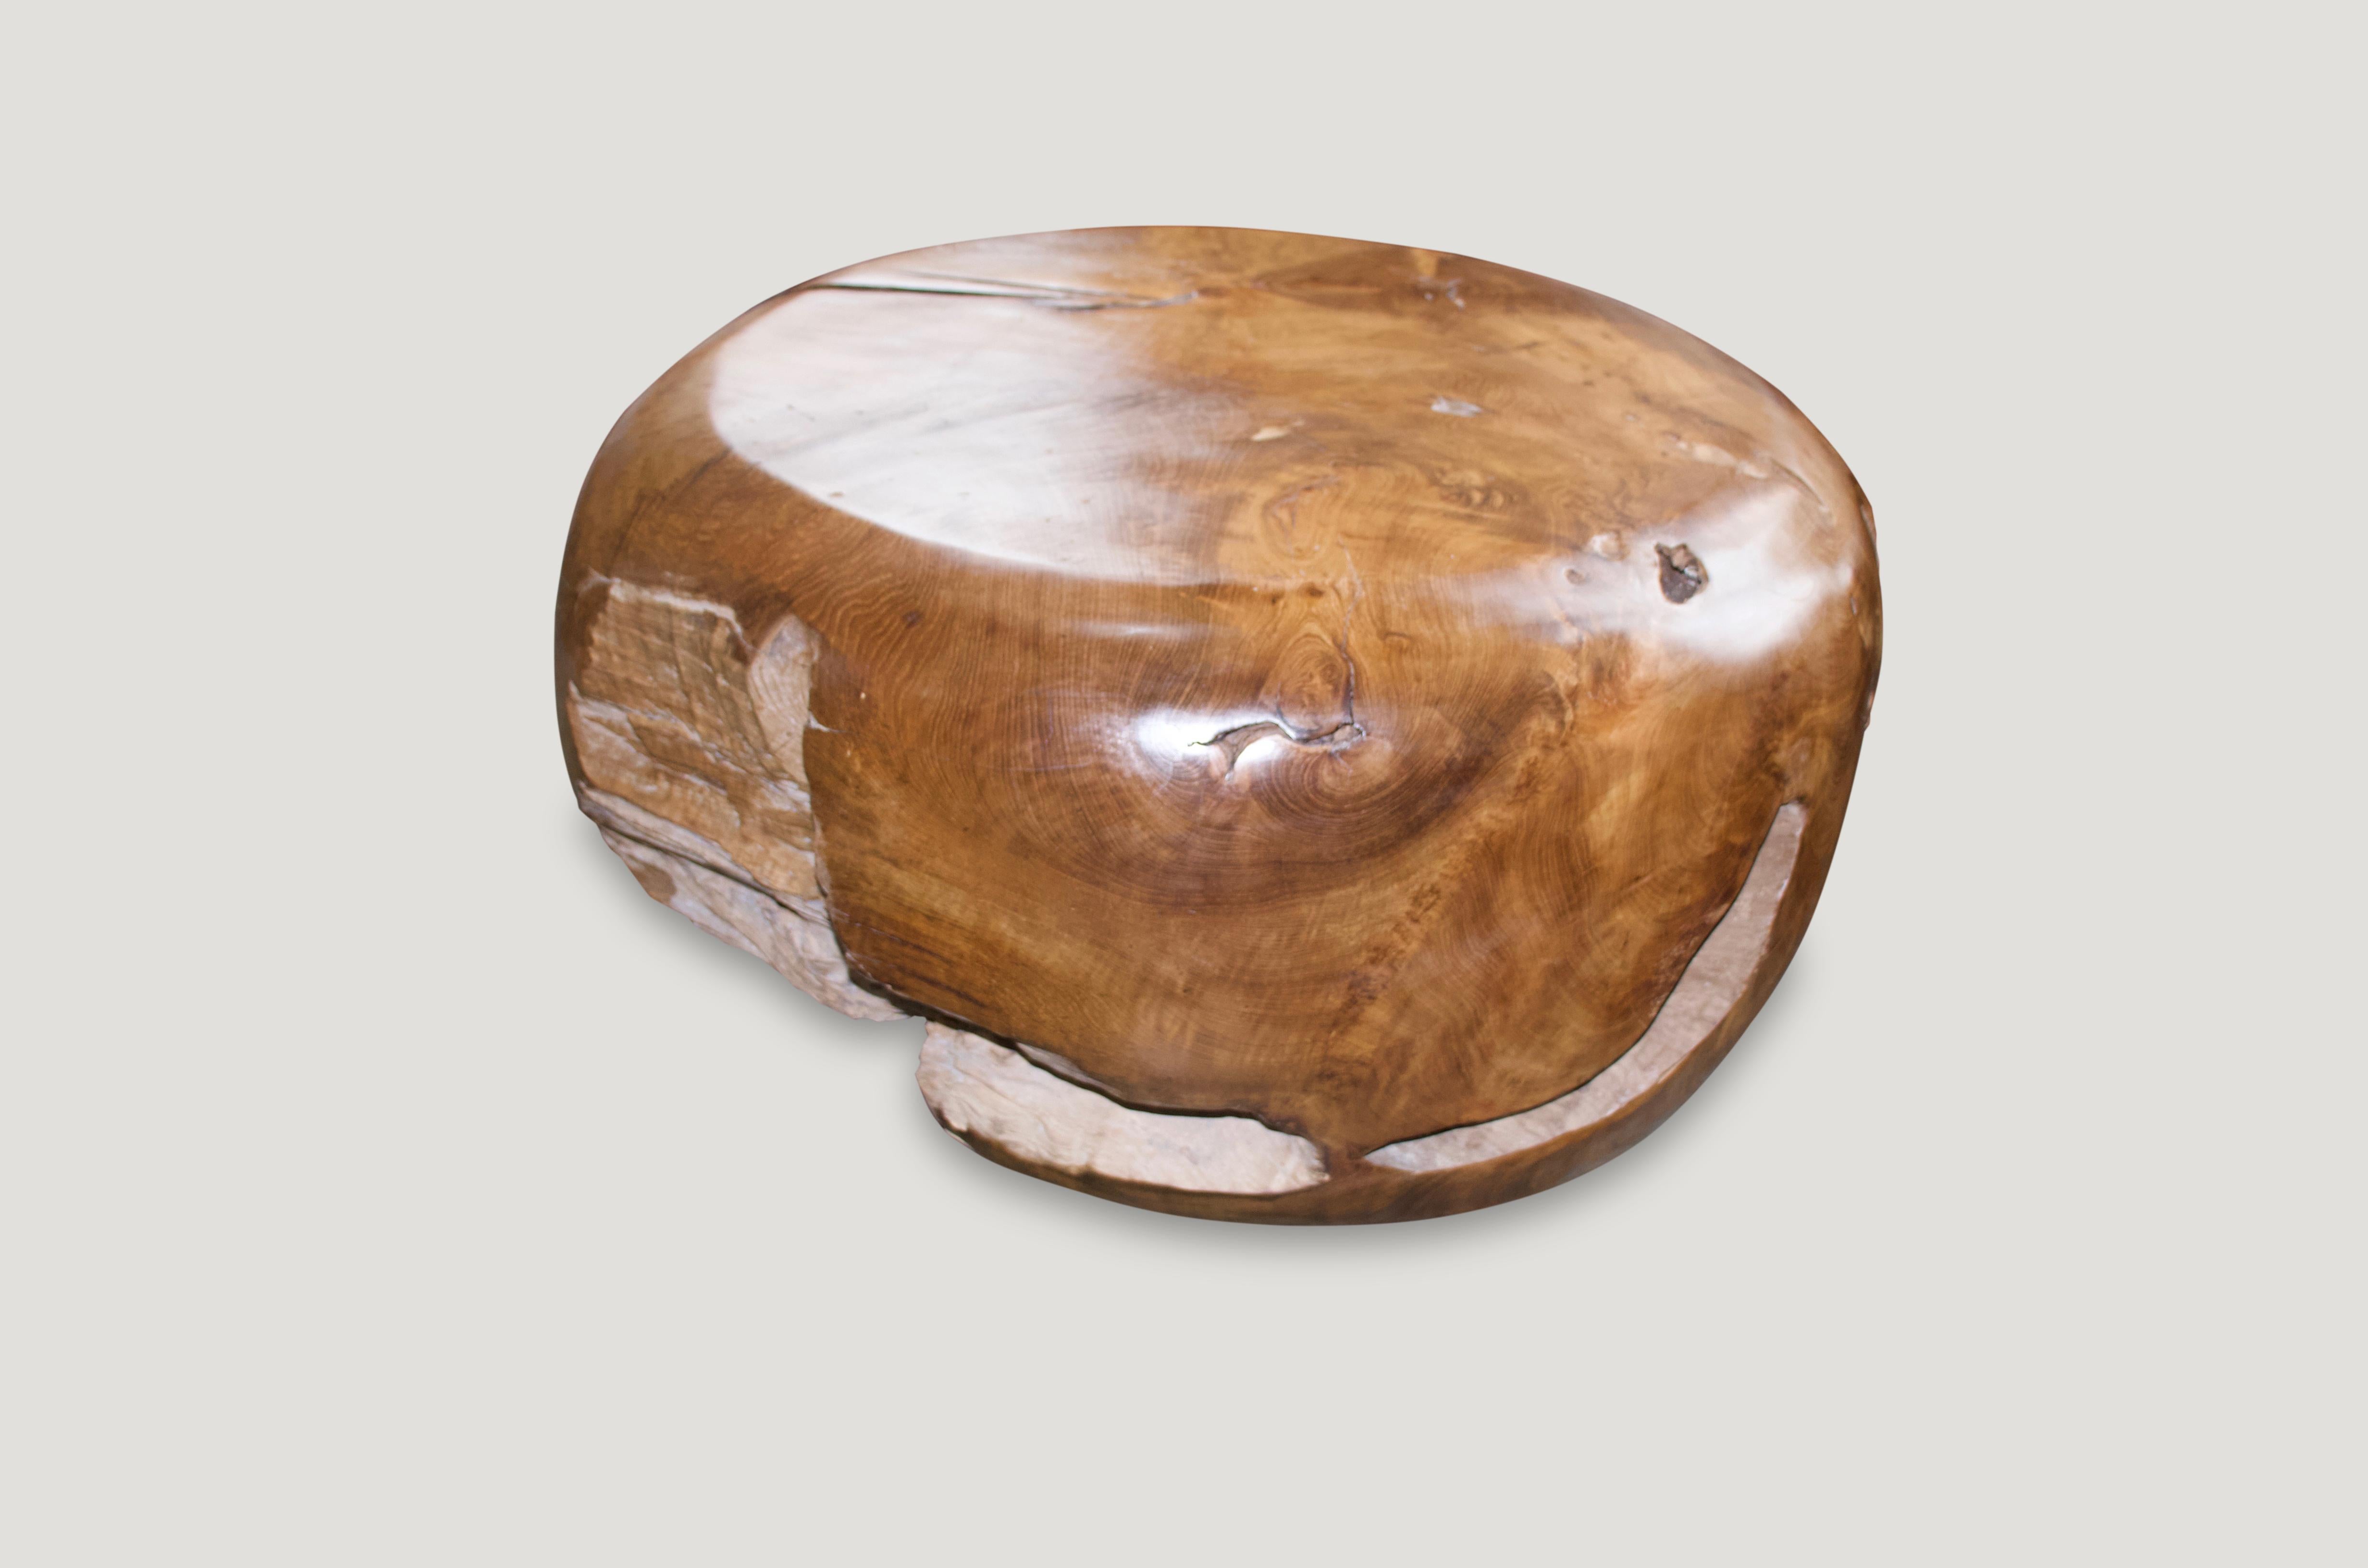 Reclaimed teak wood root coffee table or over sized side table, hand carved into a beautiful drum shape. The outer layer is polished and the inner sides we have left in their natural organic form. Organic is the new modern.

Measures: 30 – 24